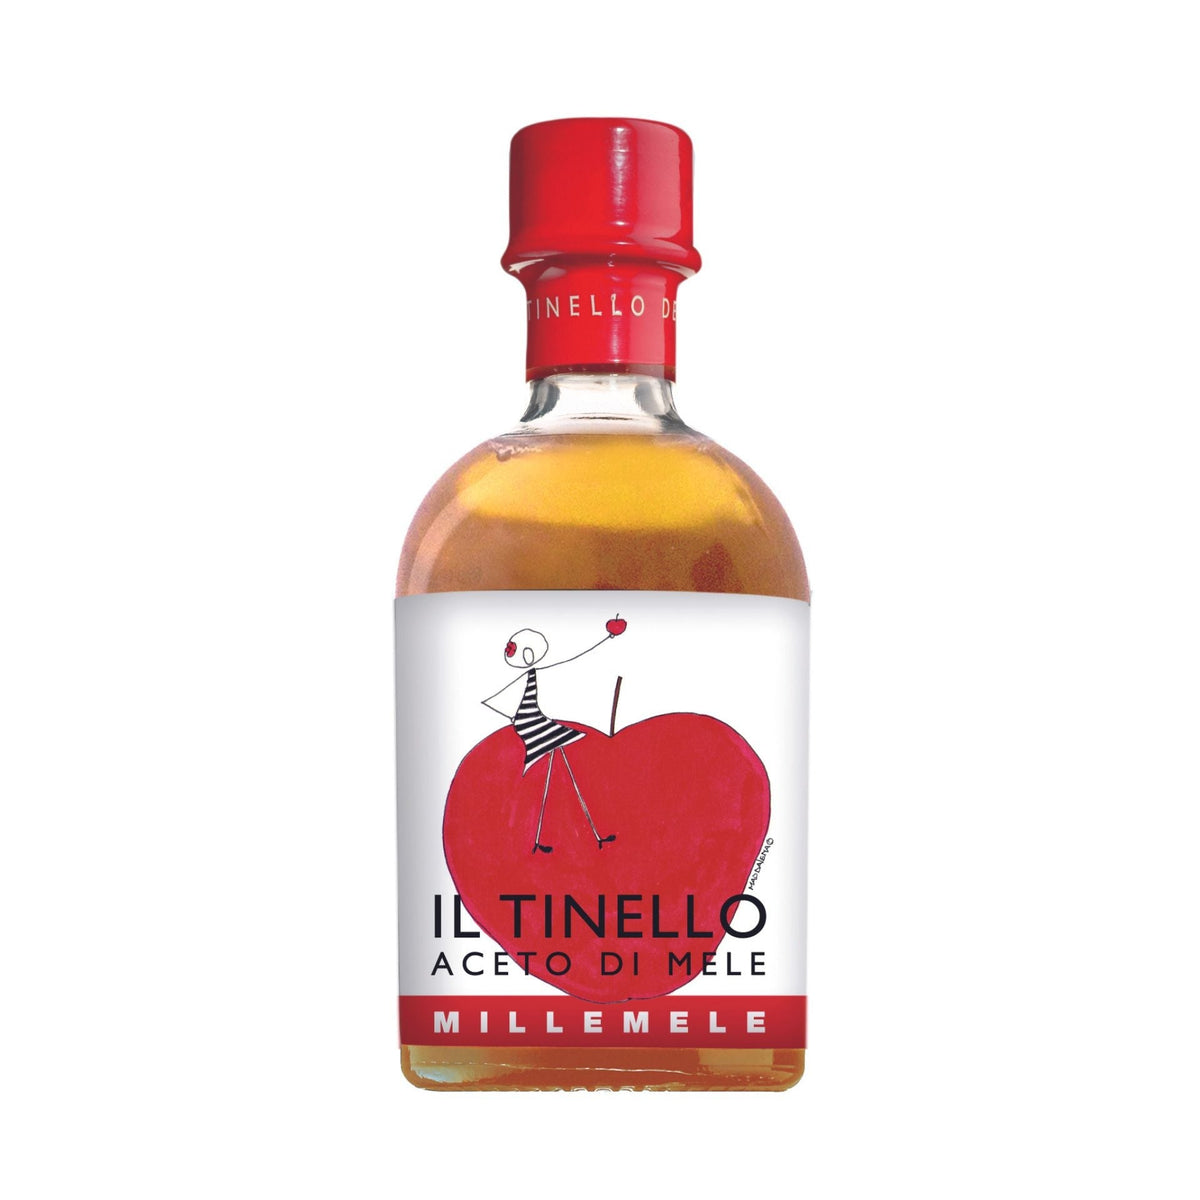 Il Borgo del Balsamico Il Tinello Millemele Apple Cider Vinegar 250ml  | Imported and distributed in the UK by Just Gourmet Foods